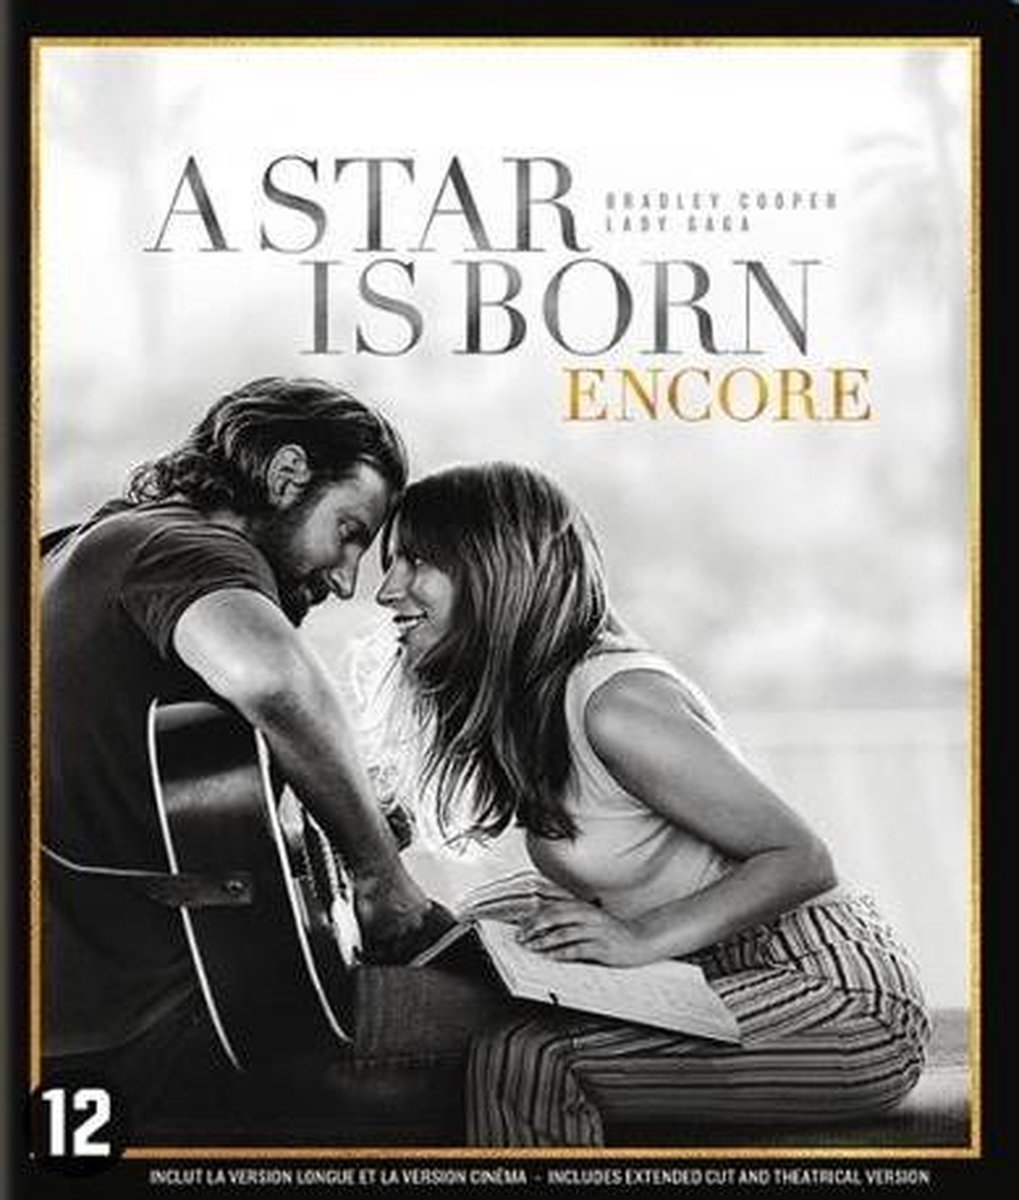 A Star Is Born (Blu-ray) (Limited Edition) - Warner Home Video